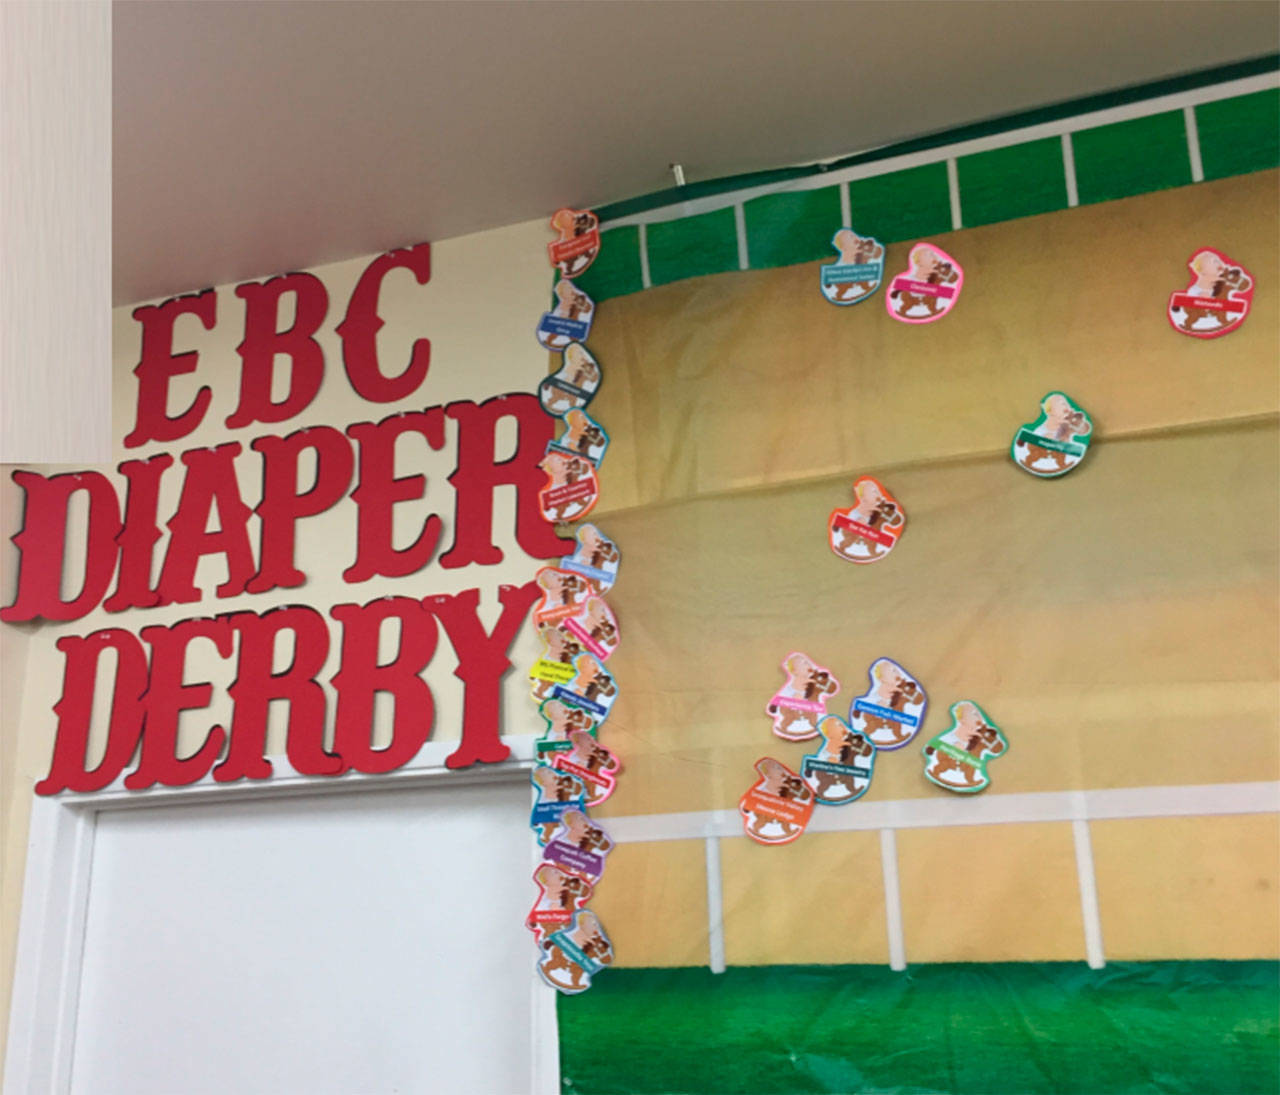 26 businesses compete in Eastside Baby Corner’s Diaper Derby